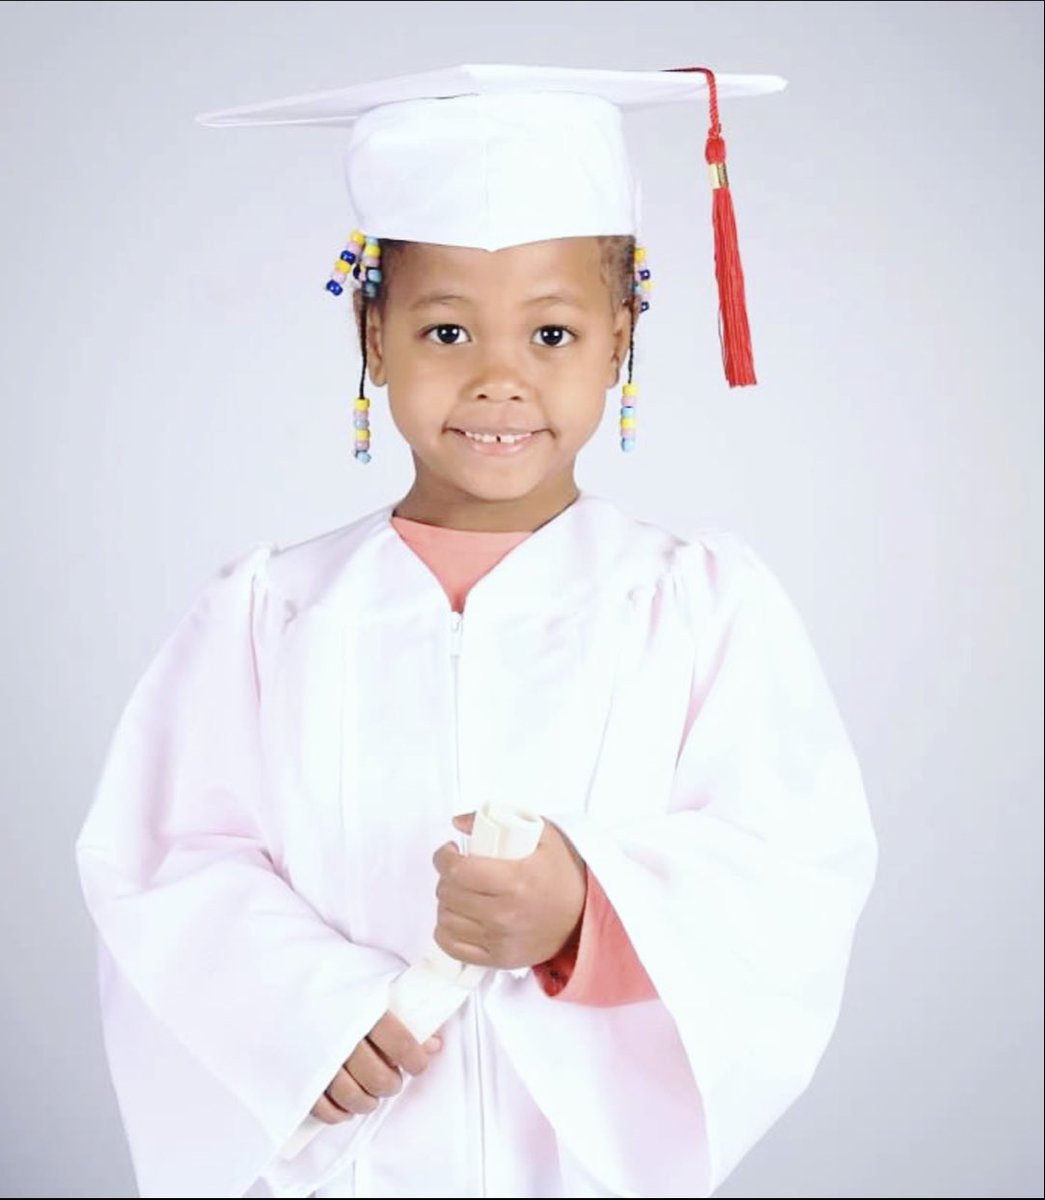 My girl! I am ✨HUGELY proud✨ of my daughter!! This Fall, my big girl will be attending Kindergarten & enrolled in the Dual Language Immersion Program! She is smart, witty, beautiful & kind #KinderPromotion #June9th #makinghermark #WhitleyJanelle #GoWhitWhit #thisisFIVE 5️⃣🍏💕🫶🏽